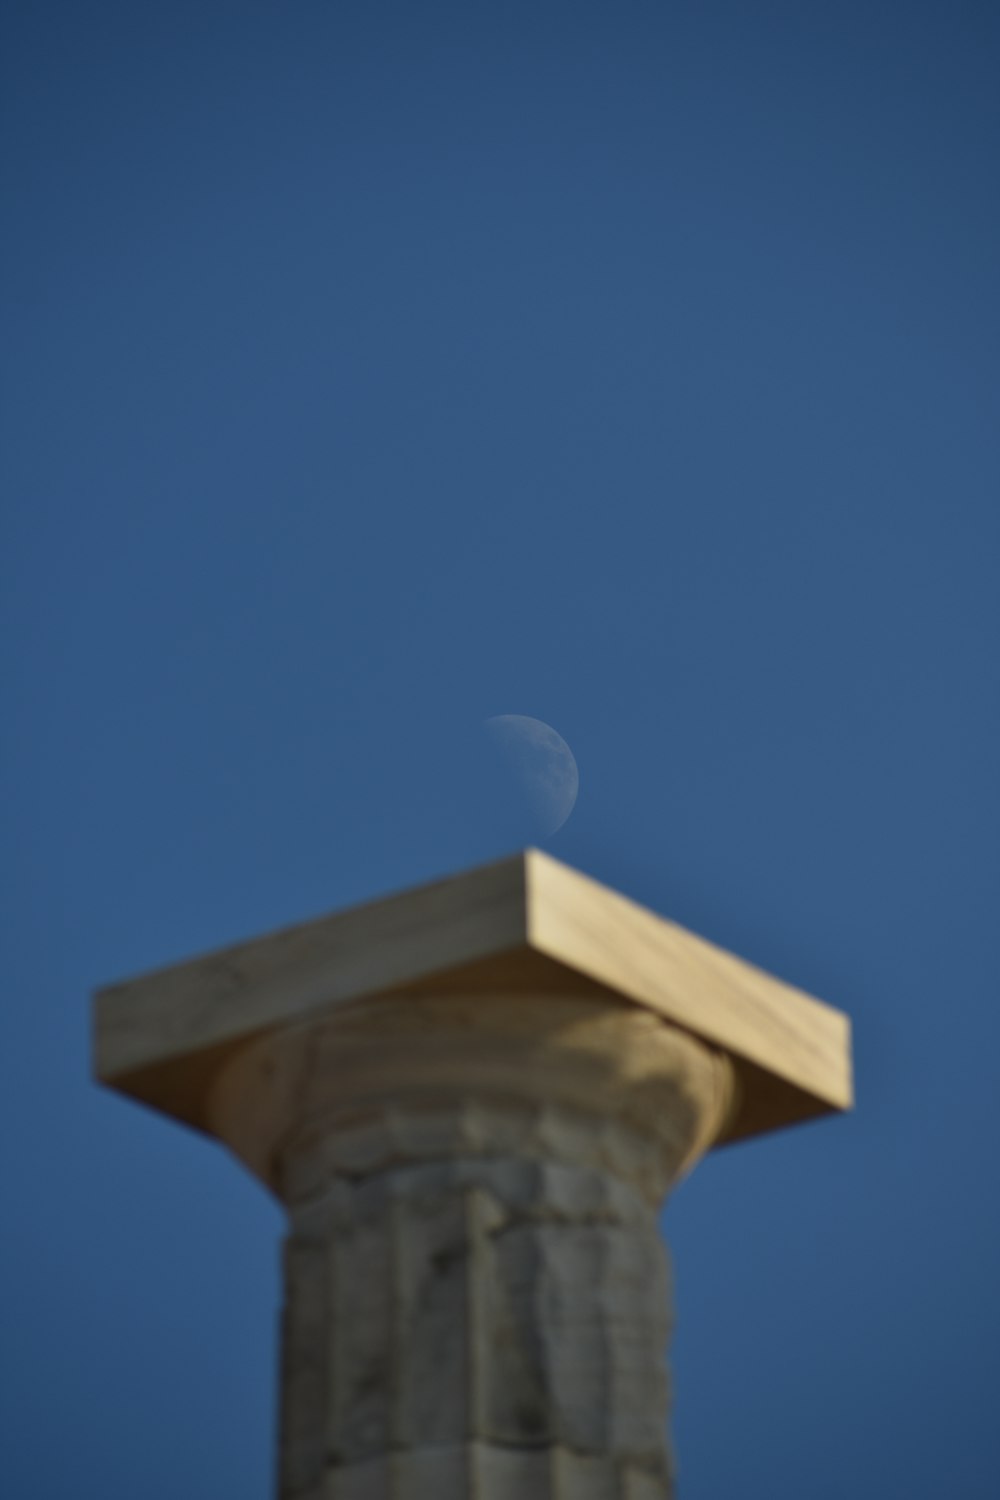 a stone building with a moon in the sky